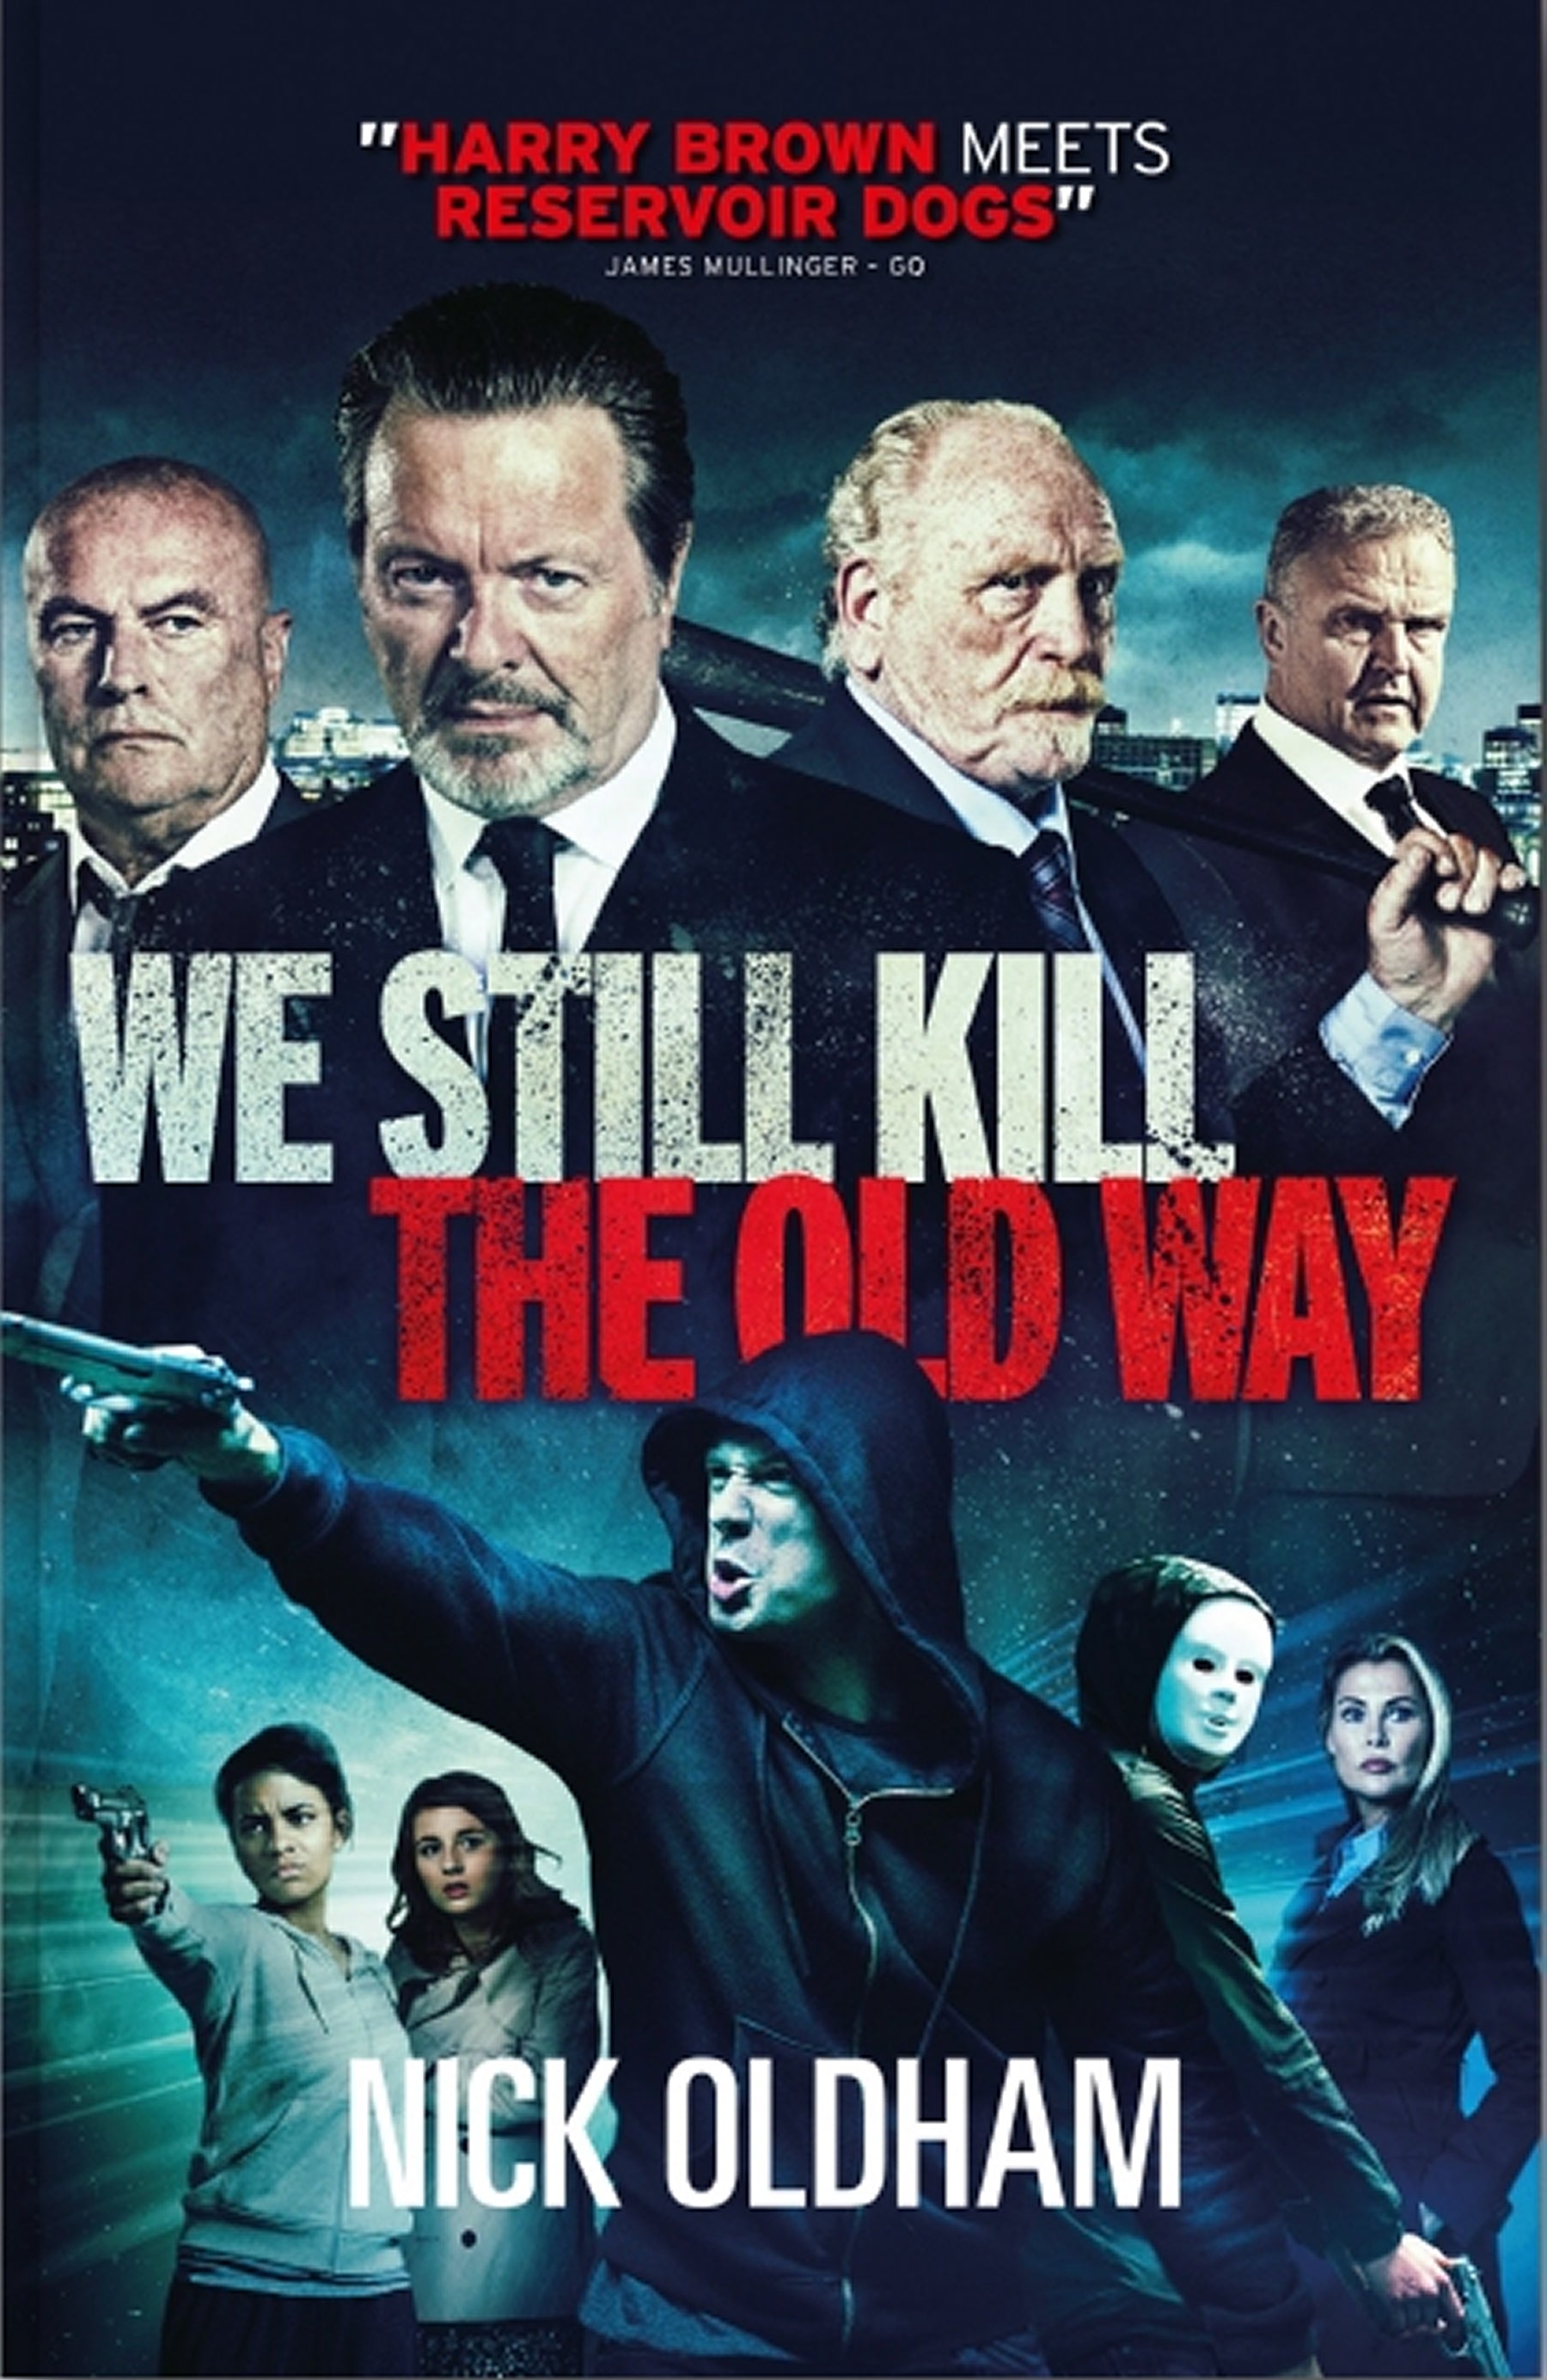 We Still Kill The Old Way by Nick Oldham